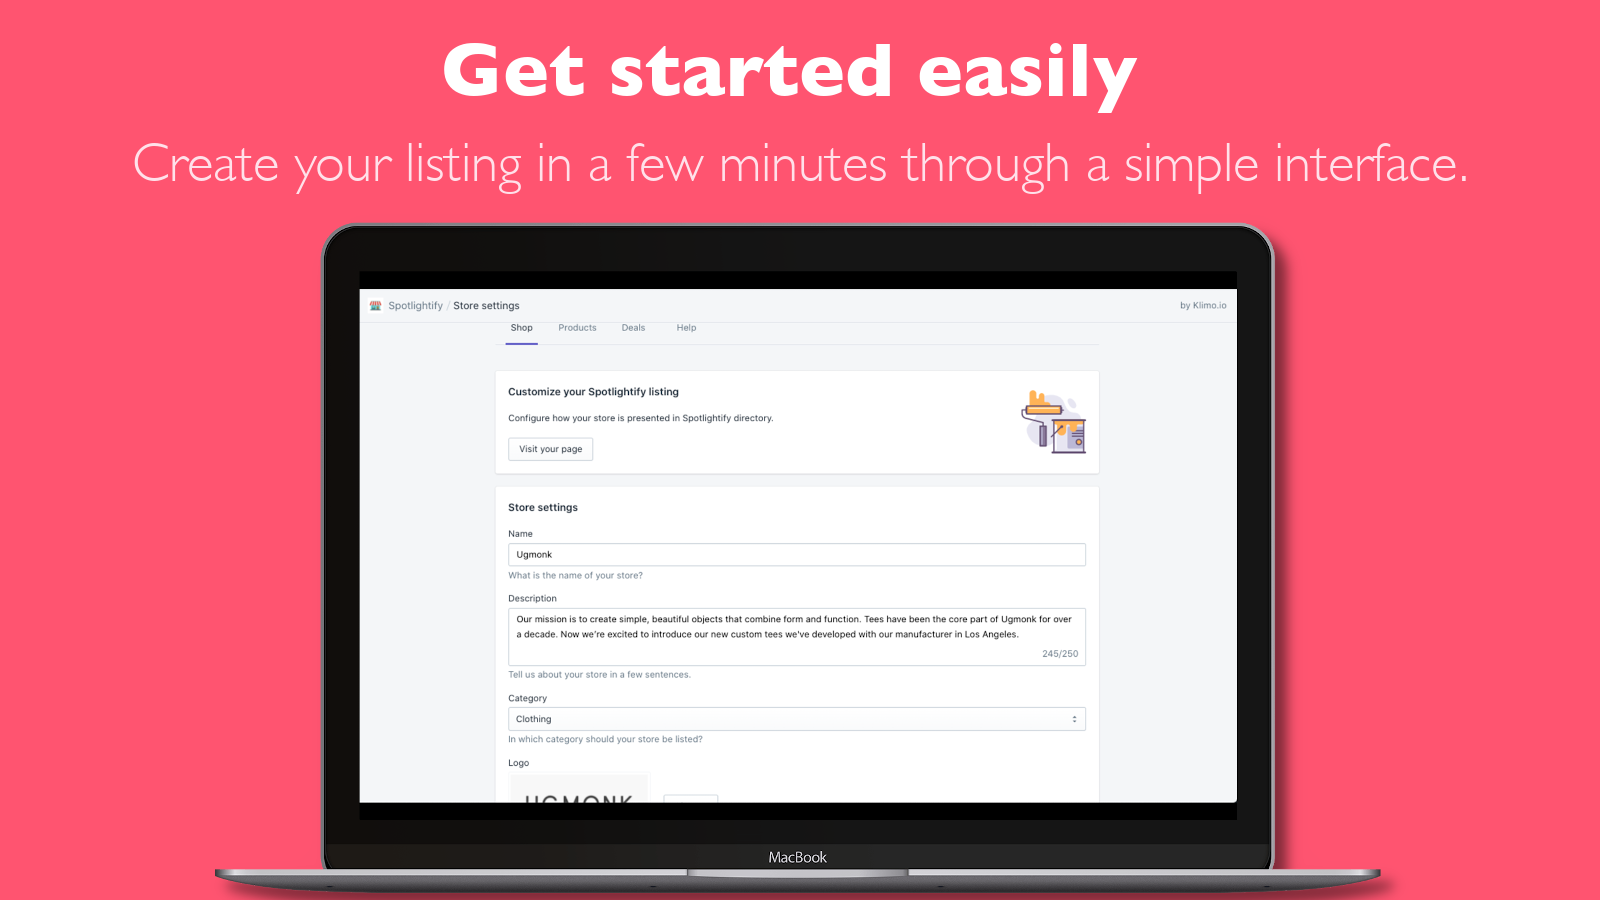 Getting started is easy. Create your listing in a few seconds.